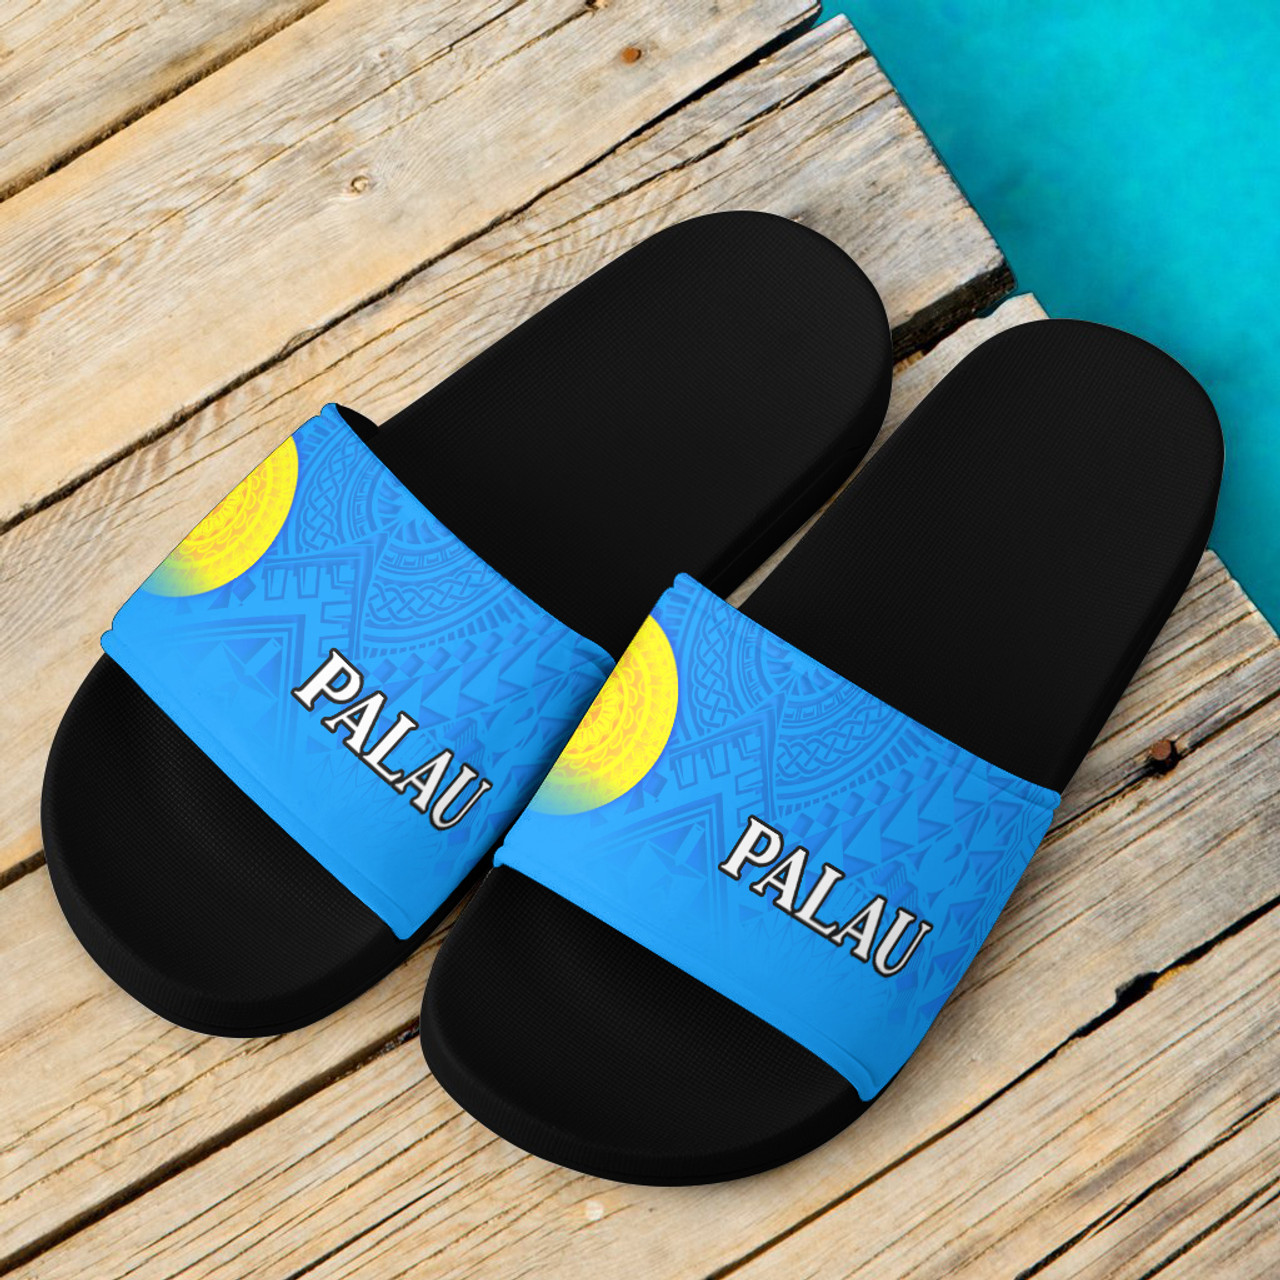 Palau Flag Color With Traditional Patterns Slide Sandals